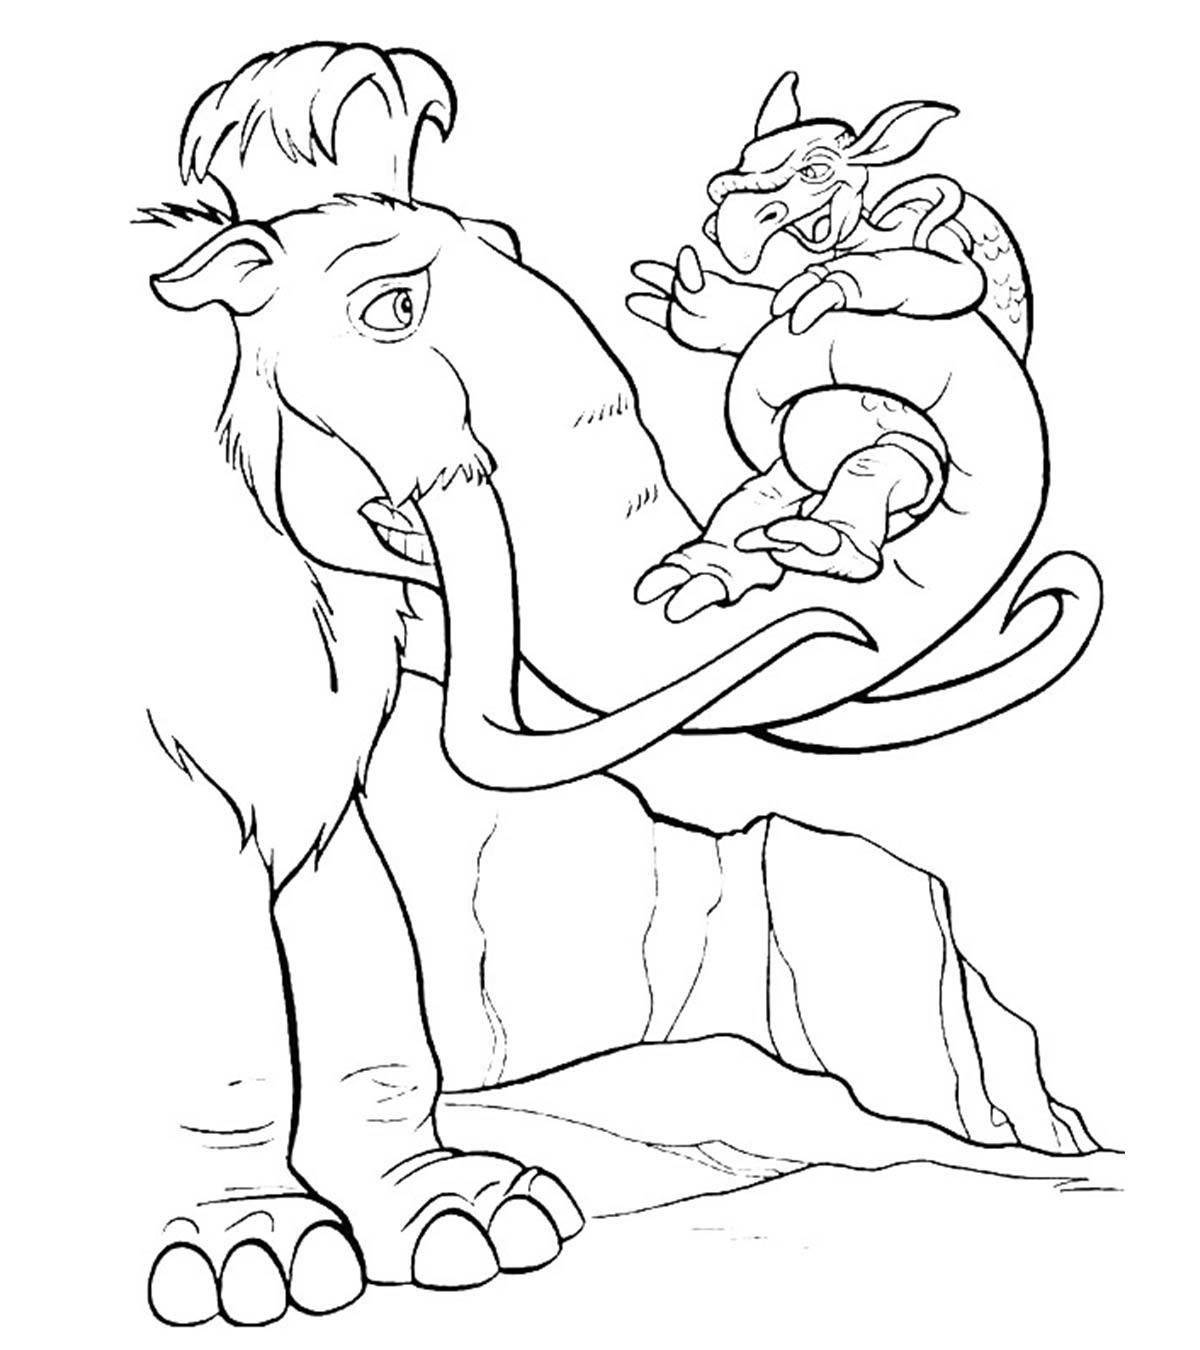 Animated ice age 4 coloring page